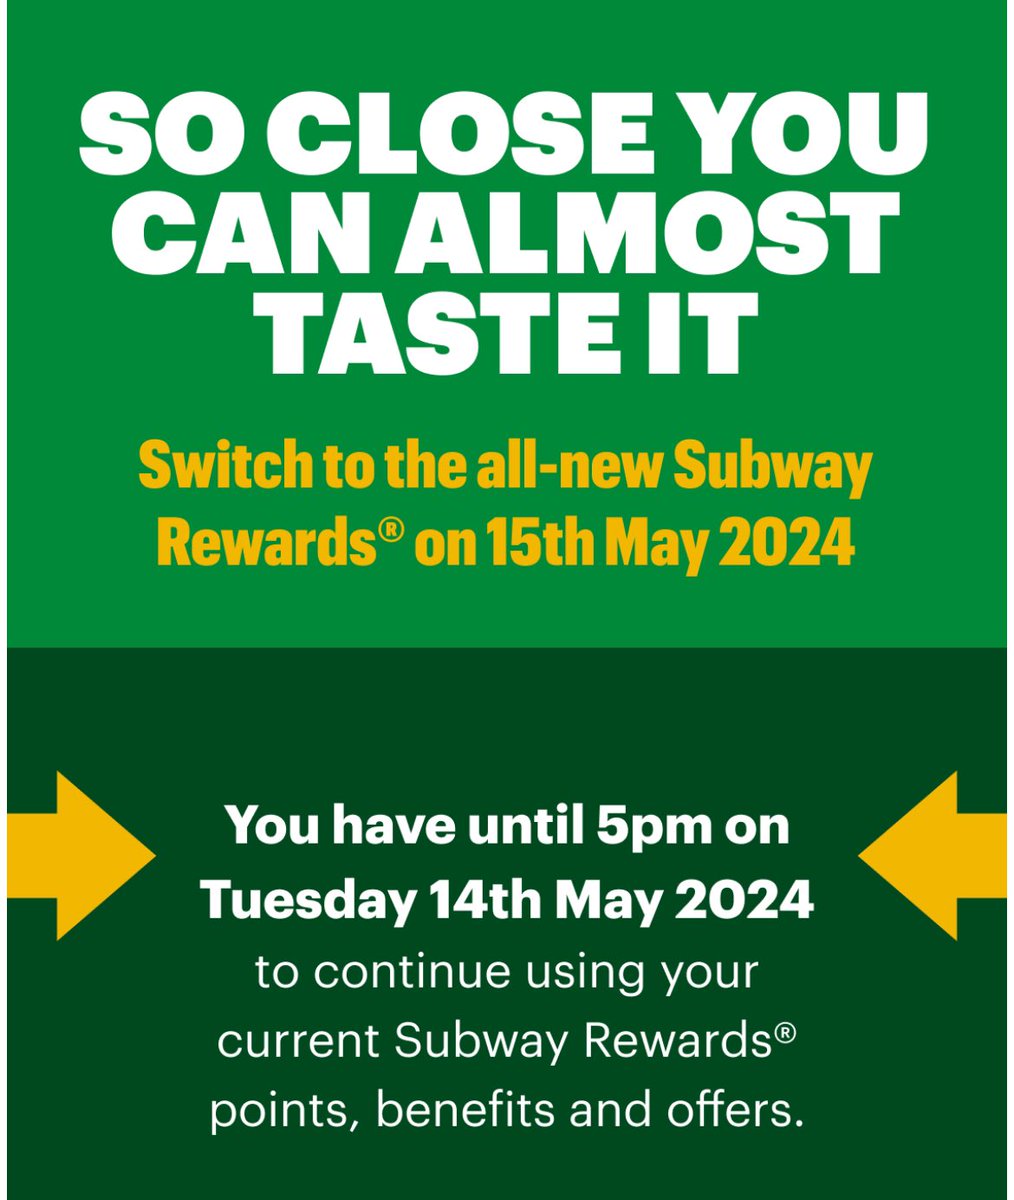 Hot tip: If you have collected enough Subway points for a freebie, they will expire at 5pm on Tuesday 14 May when they switch over to a new rewards system. Seems a shame to waste it if you have a reward pending. (Order at the till not the touchscreen. 5 mins I won't get back.)